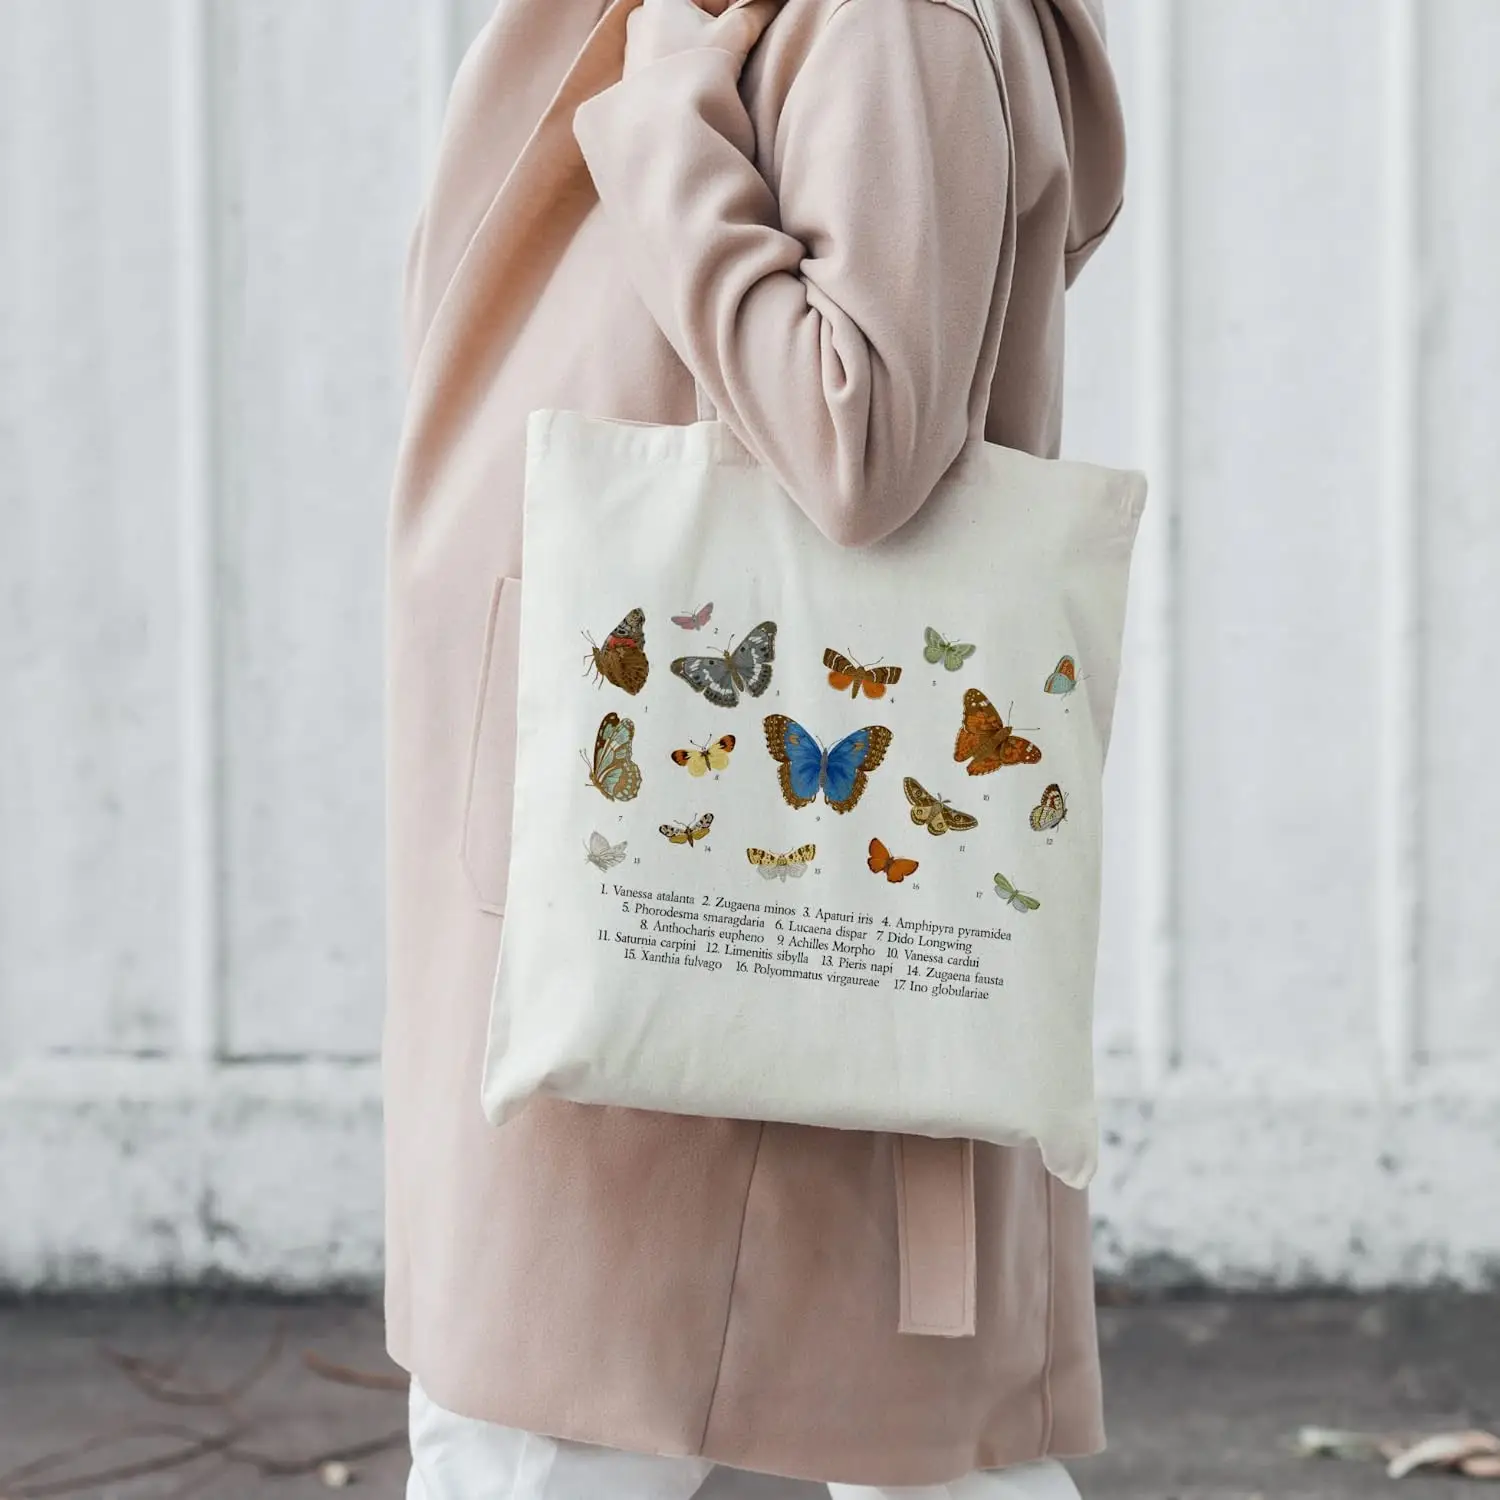 Source Cute Canvas Tote Bag with 2 Inner Pockets Aesthetic Beach Tote Bag  with Handles 14.75* H15.2 Reusable Tote Bag Washable on m.